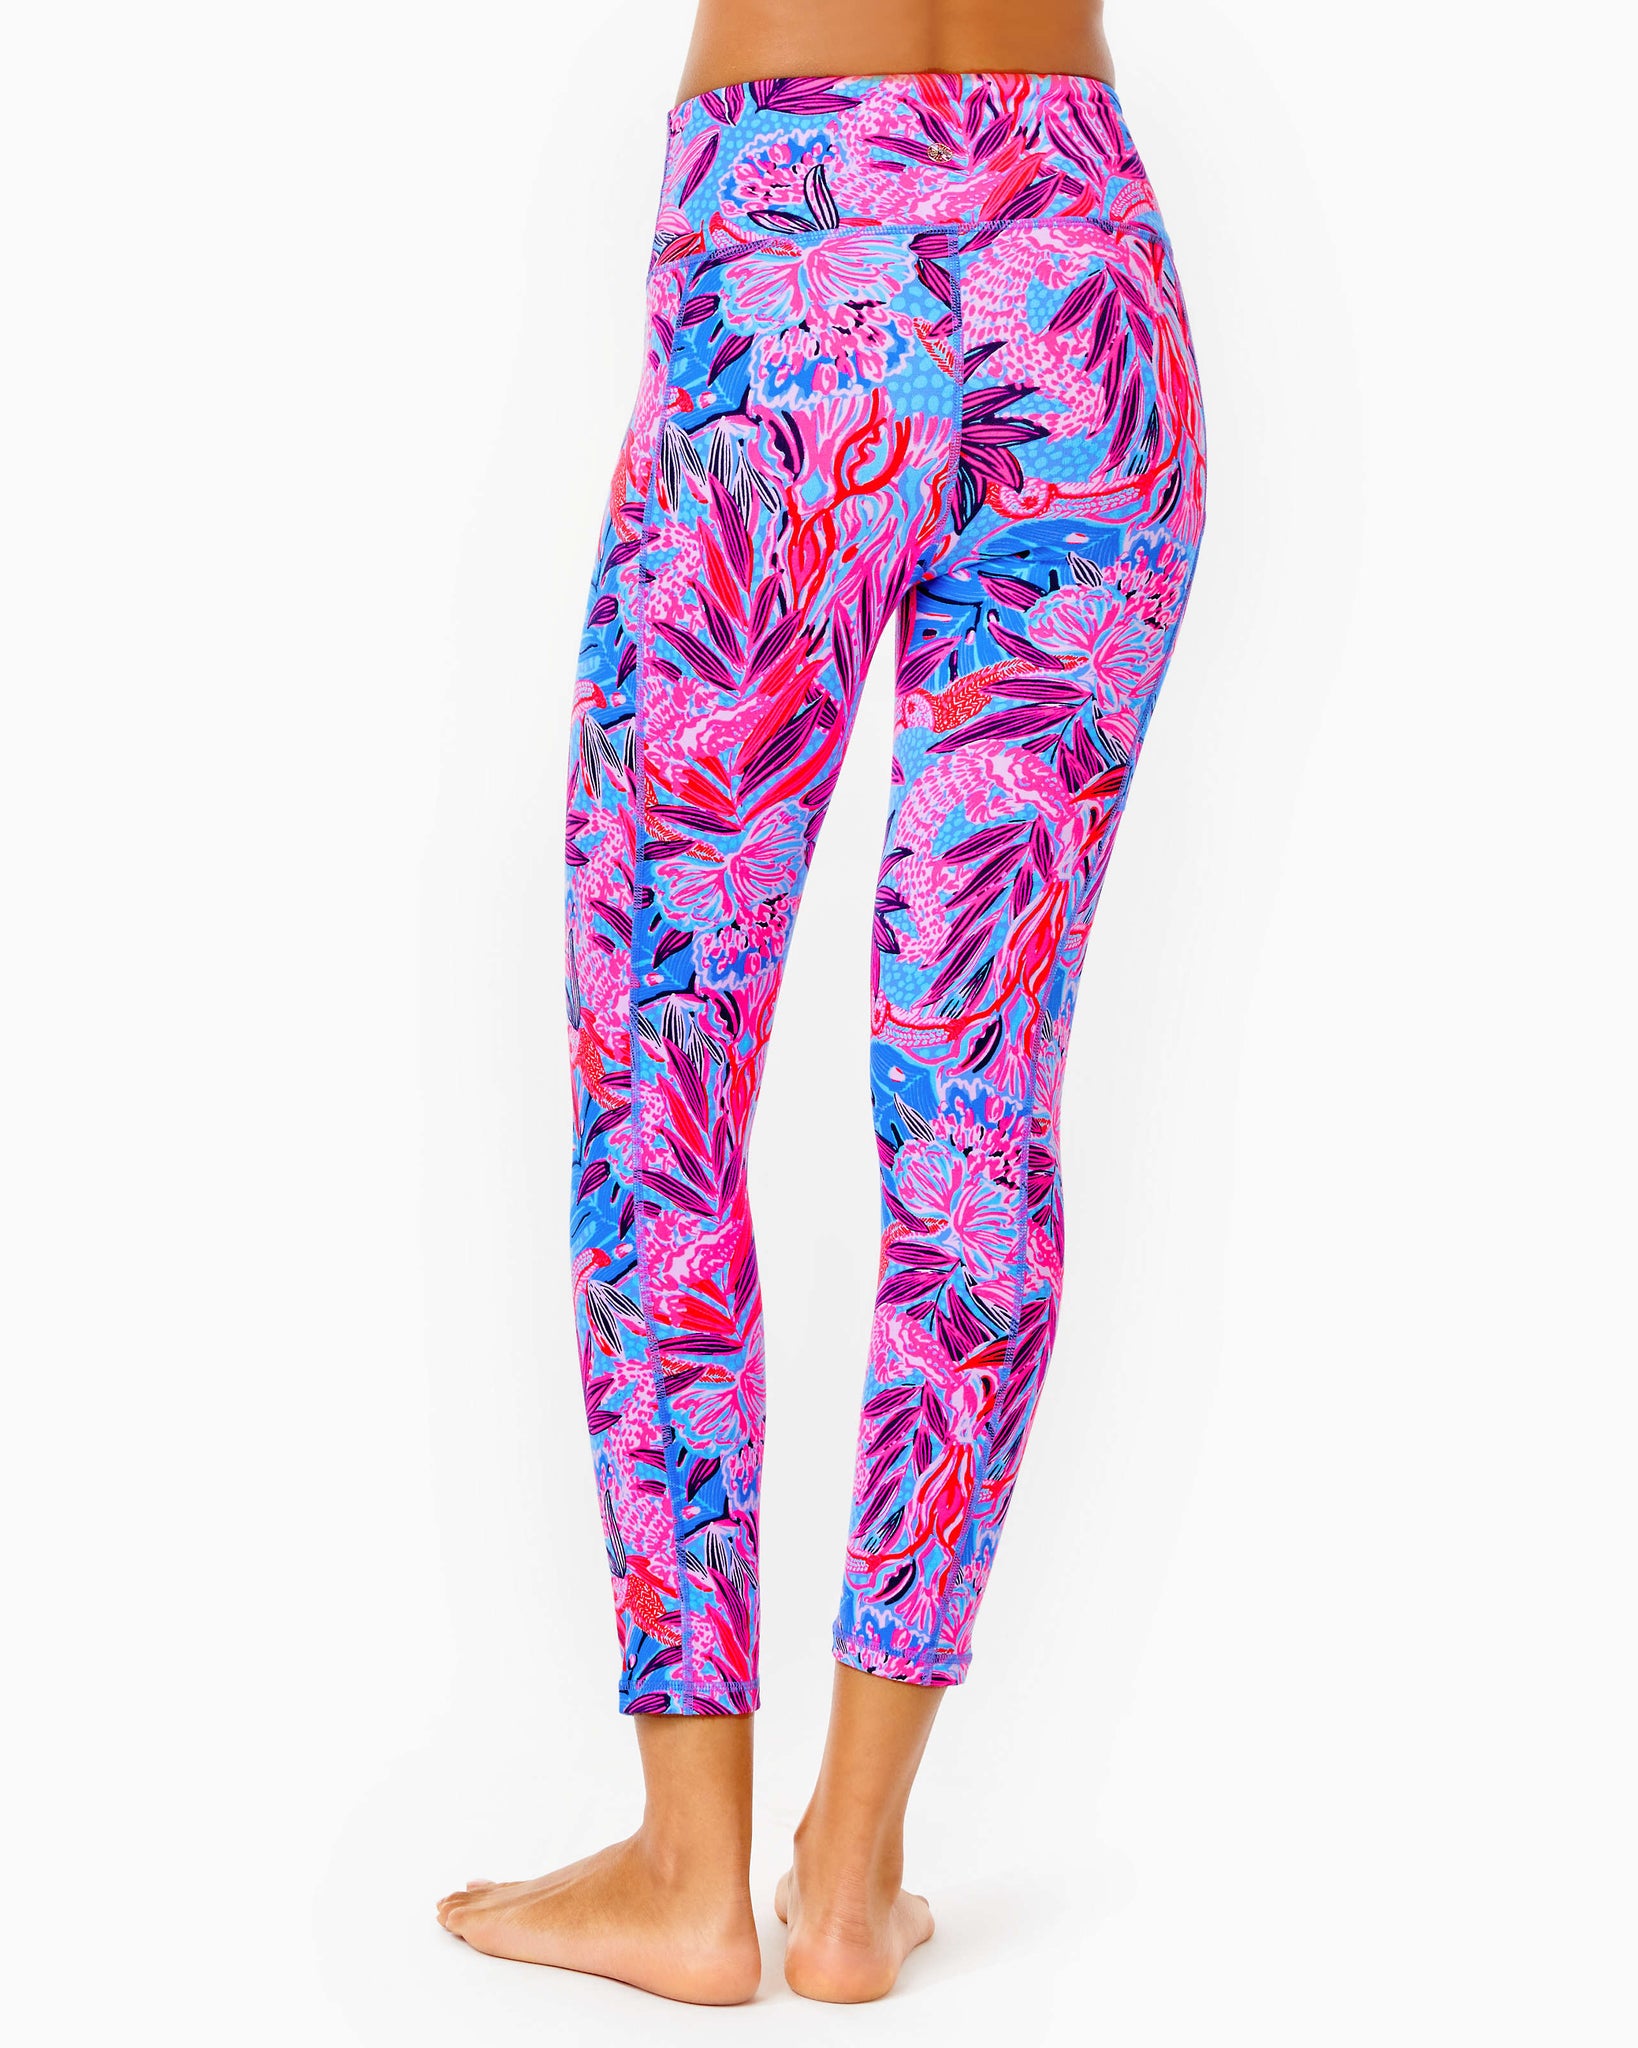 Lilly Pulitzer Luxletic Weekender High Rise Legging UPF 50 Women’s Size XS